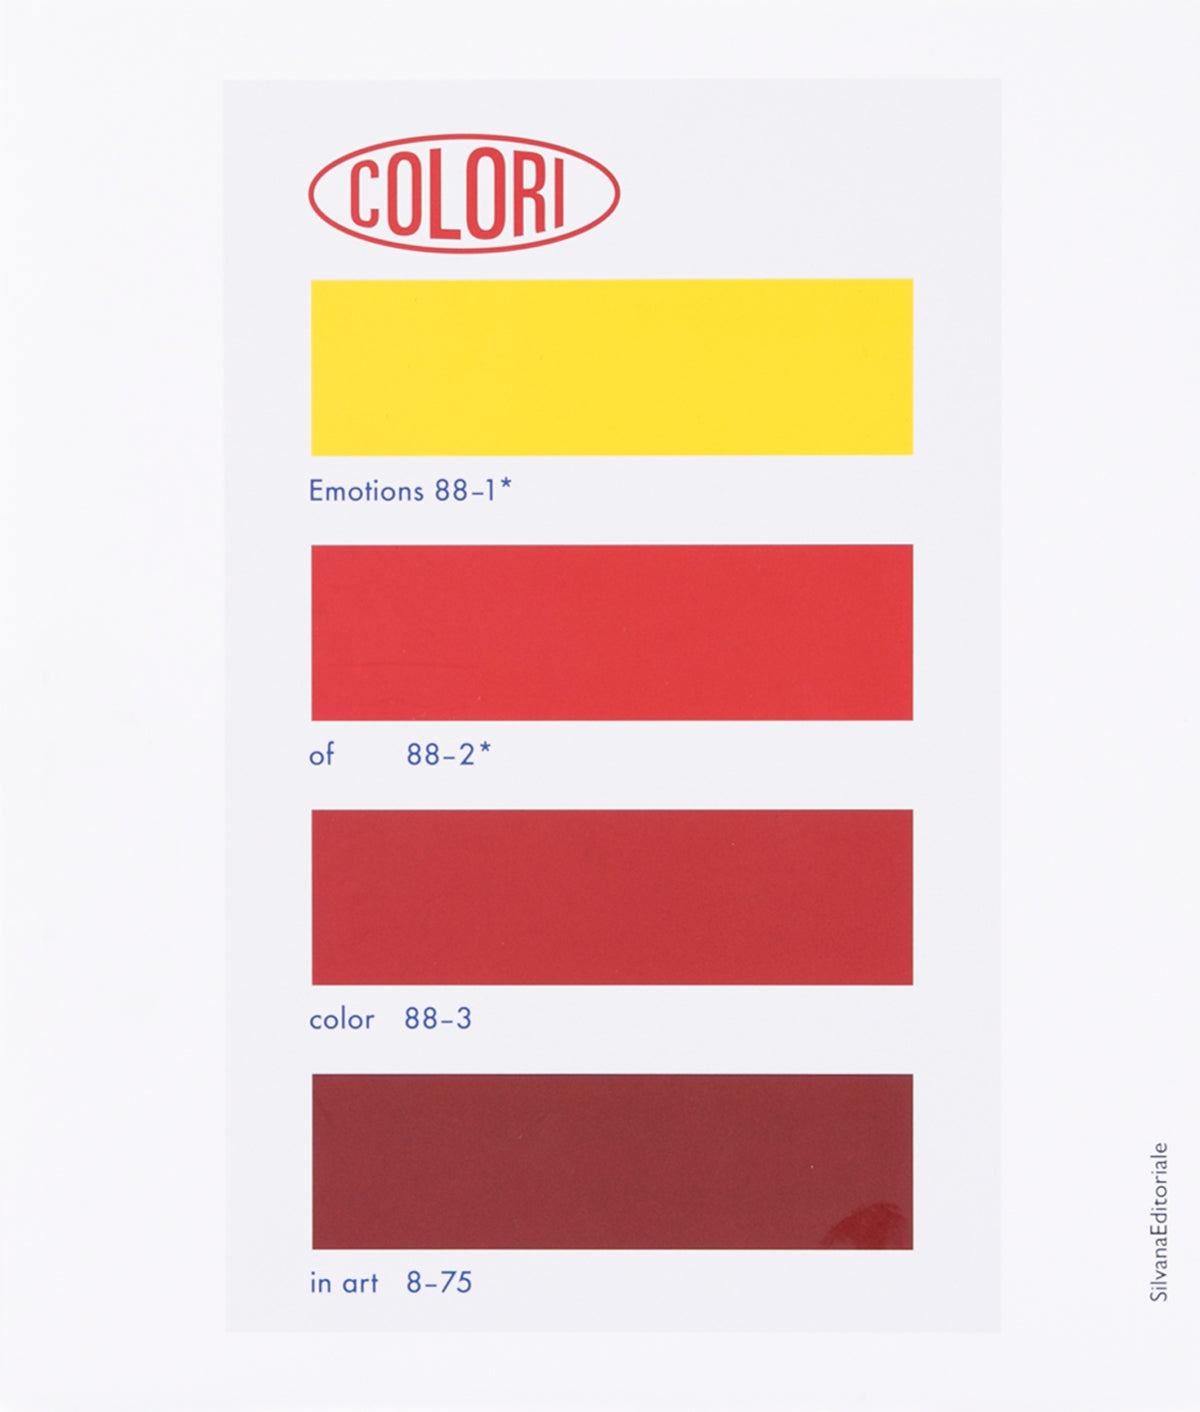 Colori: Emotions of Color in Art